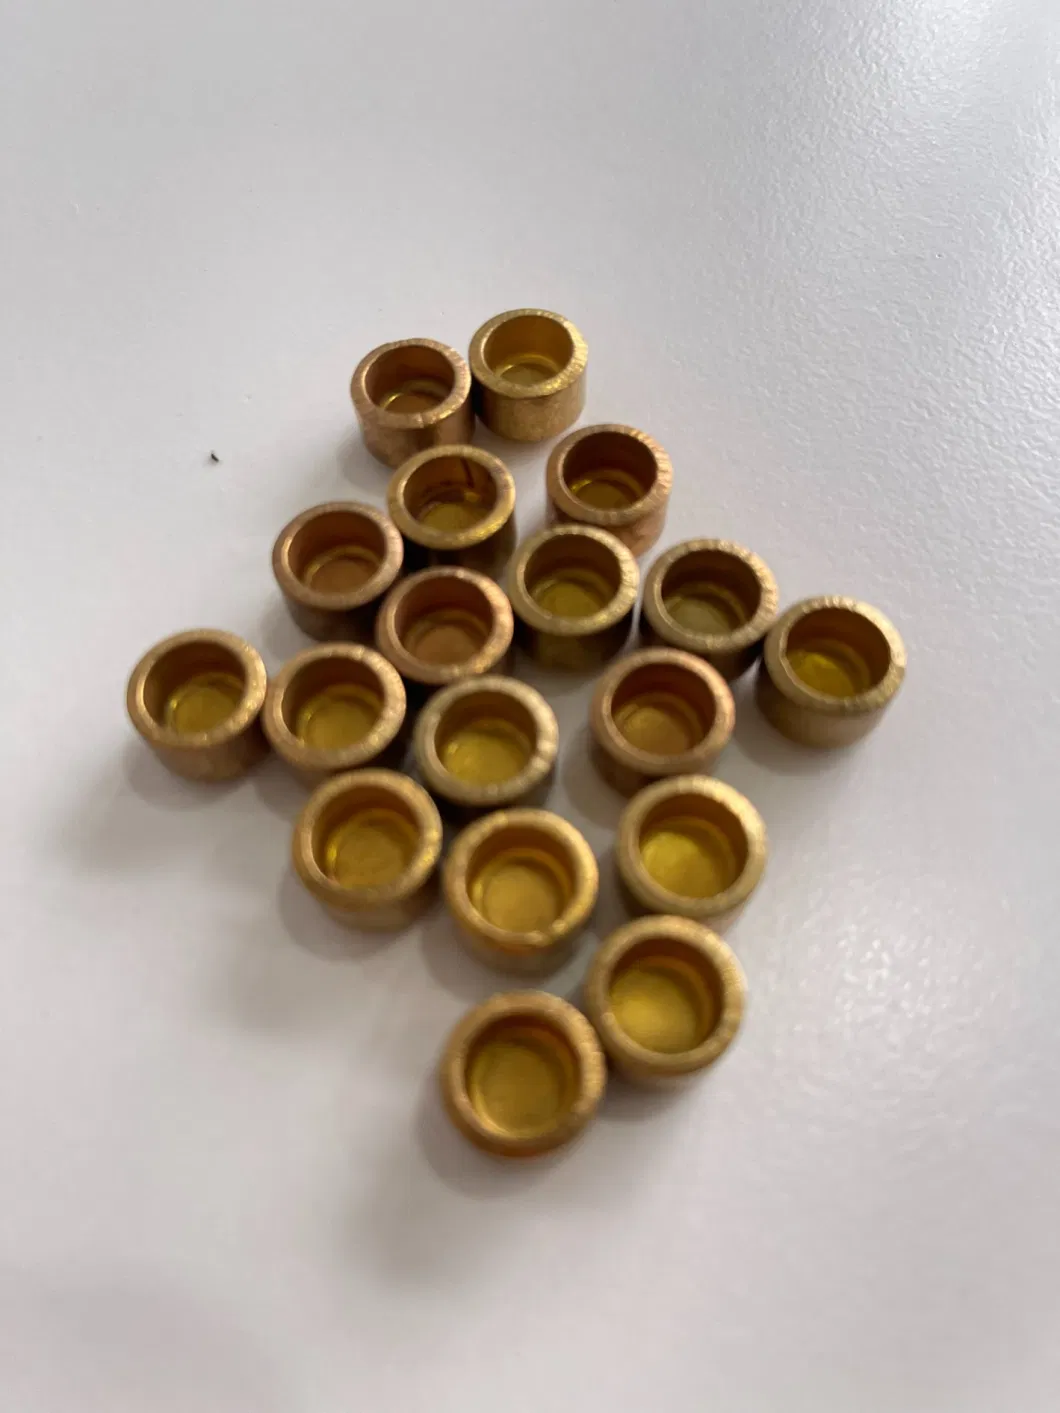 C22000/C26000/H90/H70 Bullet Shell Cartridge Case of Brass Cups